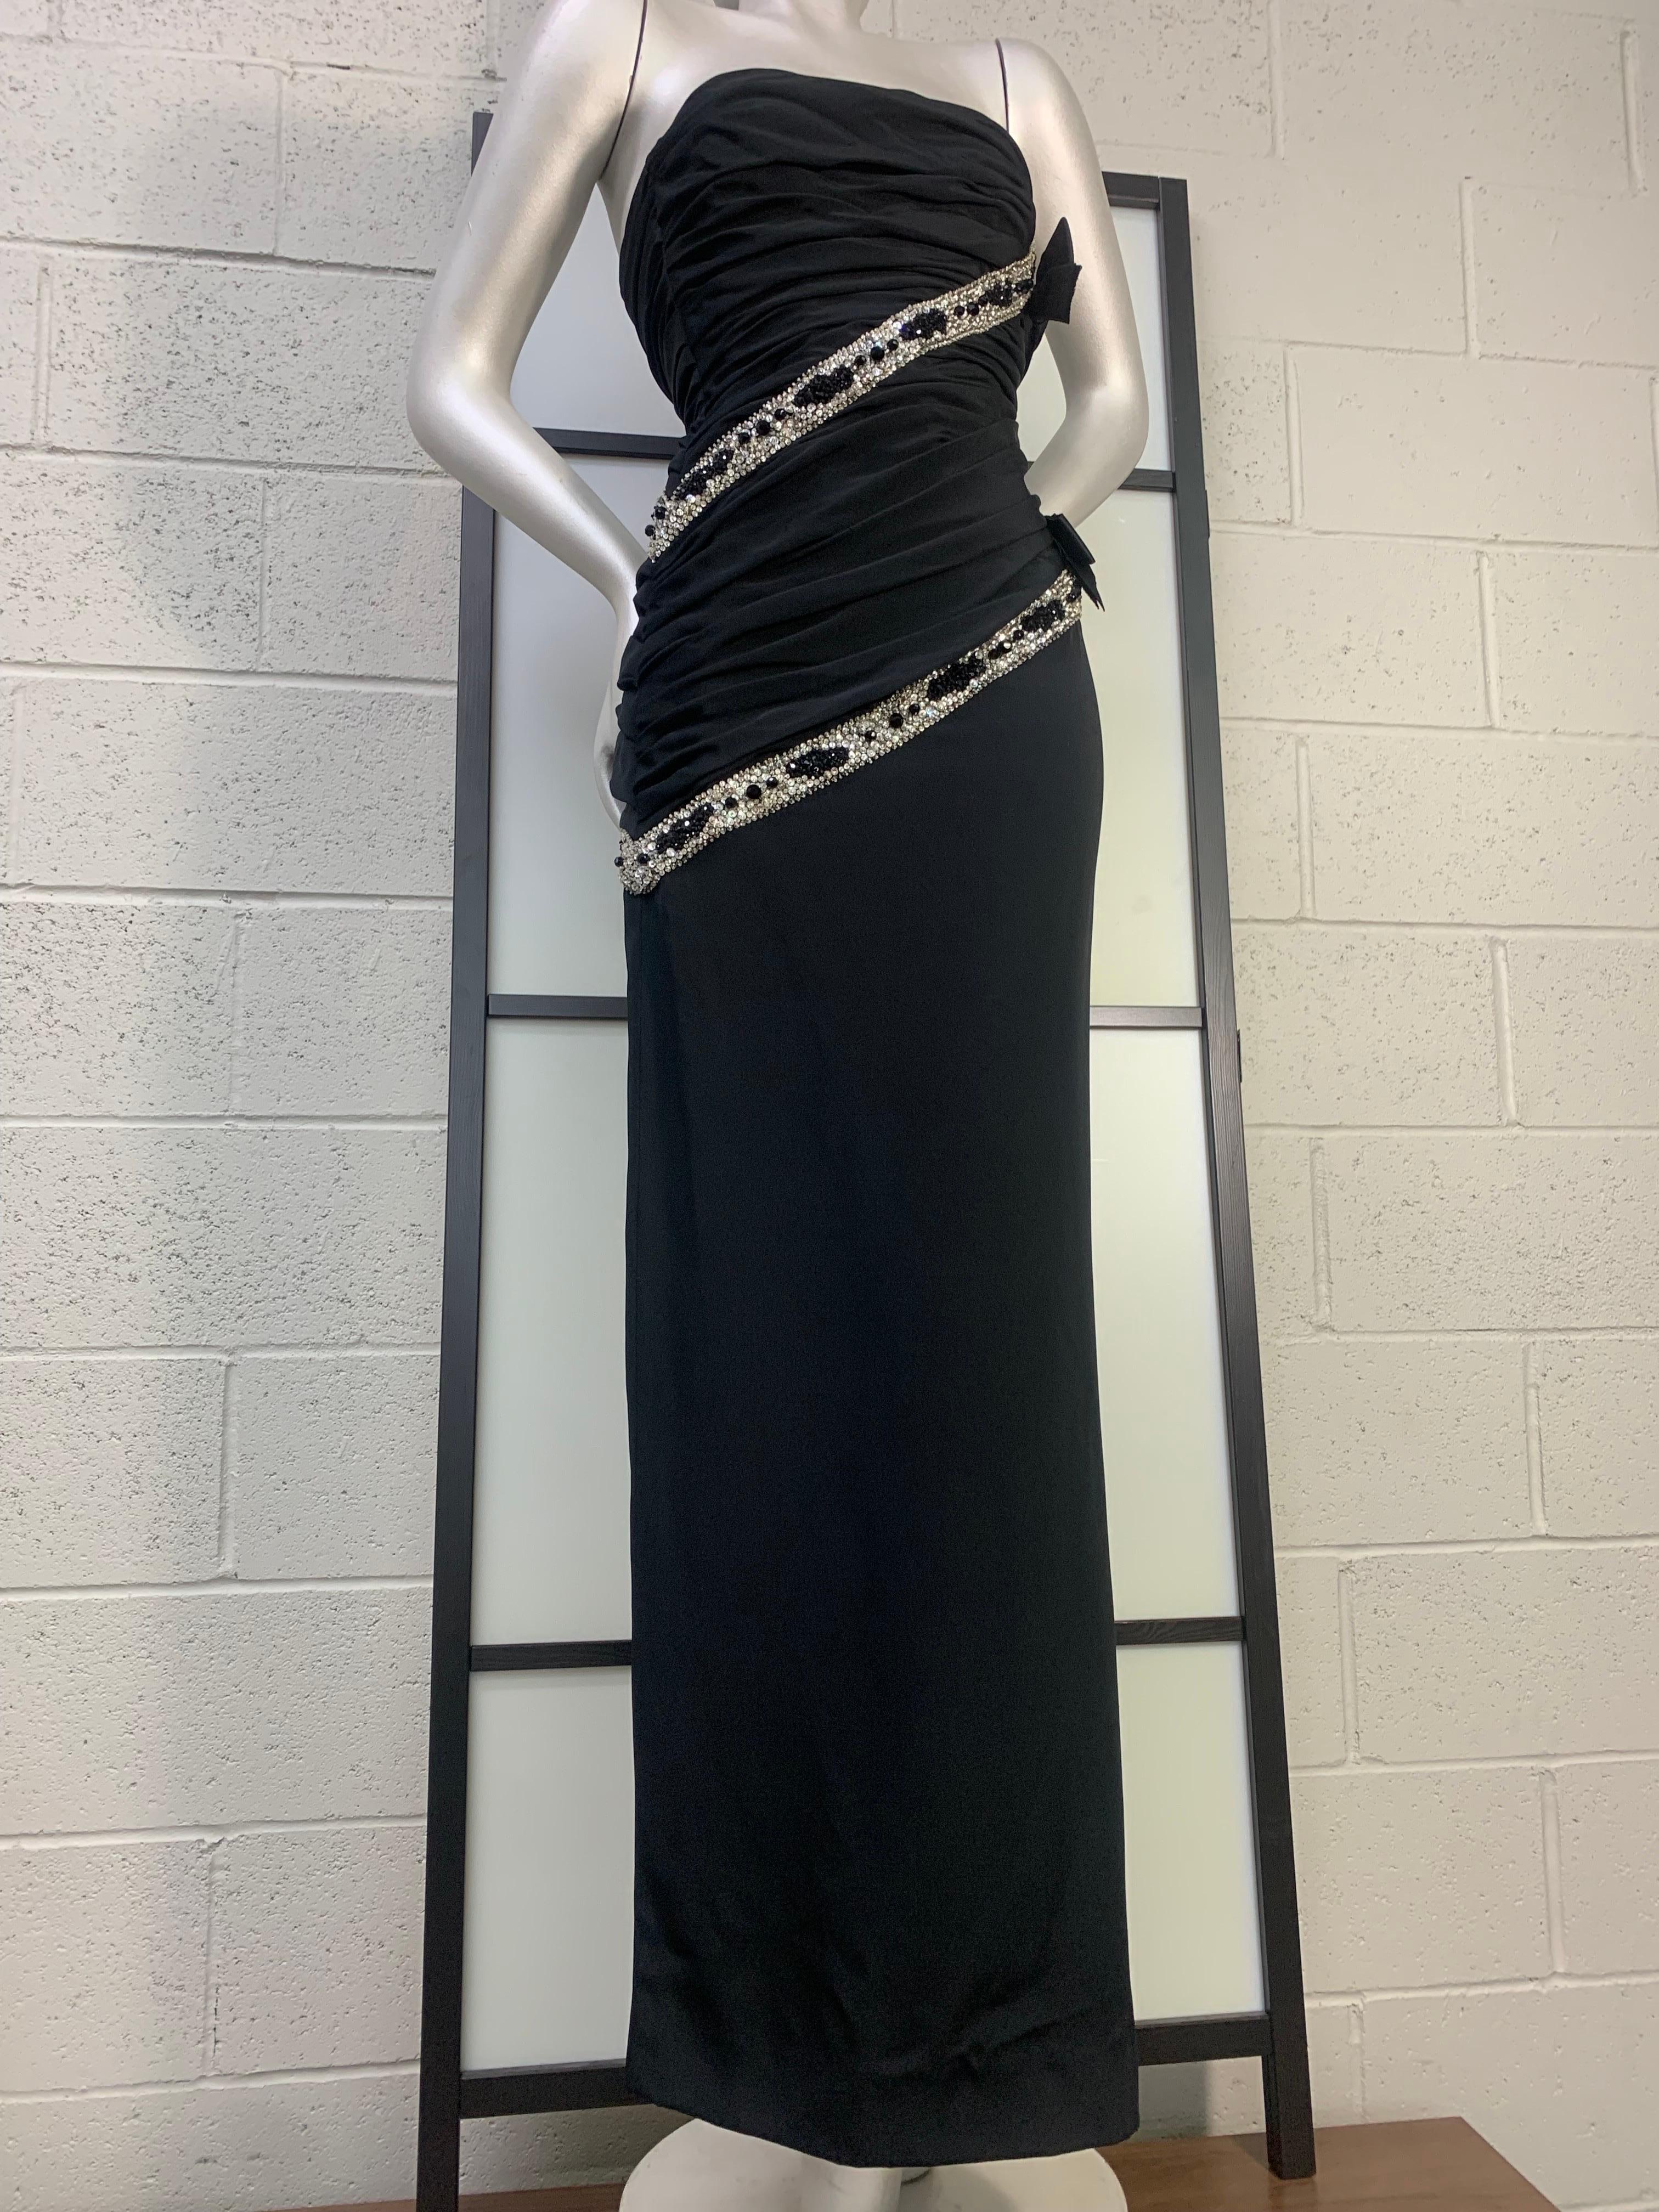 1987 James Galanos Black Silk Crepe Strapless Corset Gown w Crystal Beading: Ruched column gown in a body conscious silhouette with full corselet structure inside.  Diagonal spiraled black and white crystal beaded tape embellishment. High side slit.